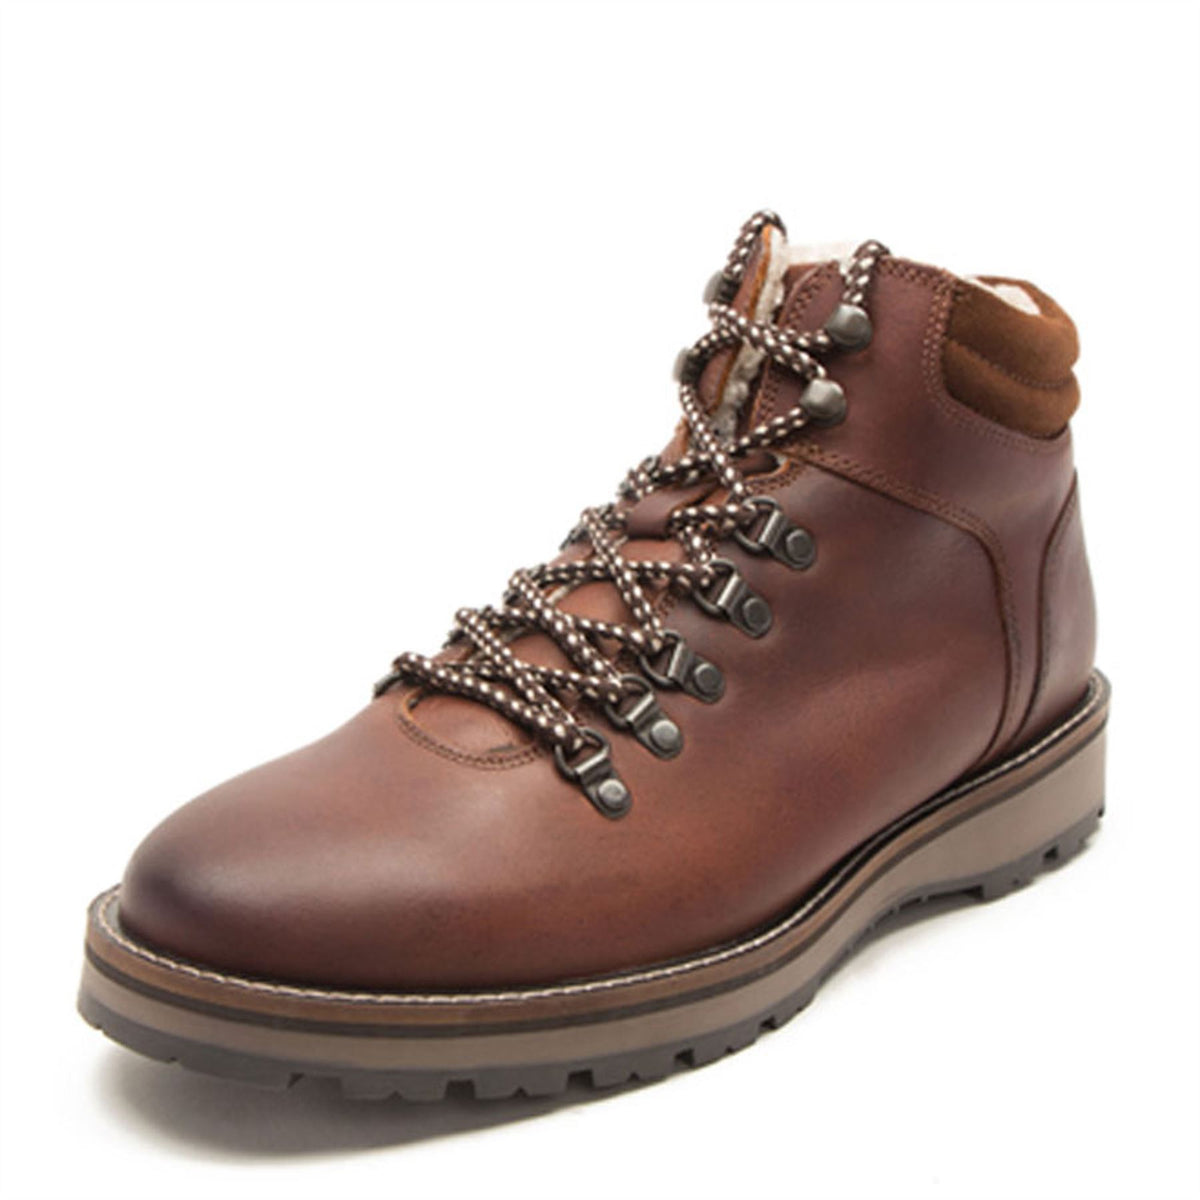 Red Tape Crick Dekker Hiker Mens Lace Leather Casual Boots